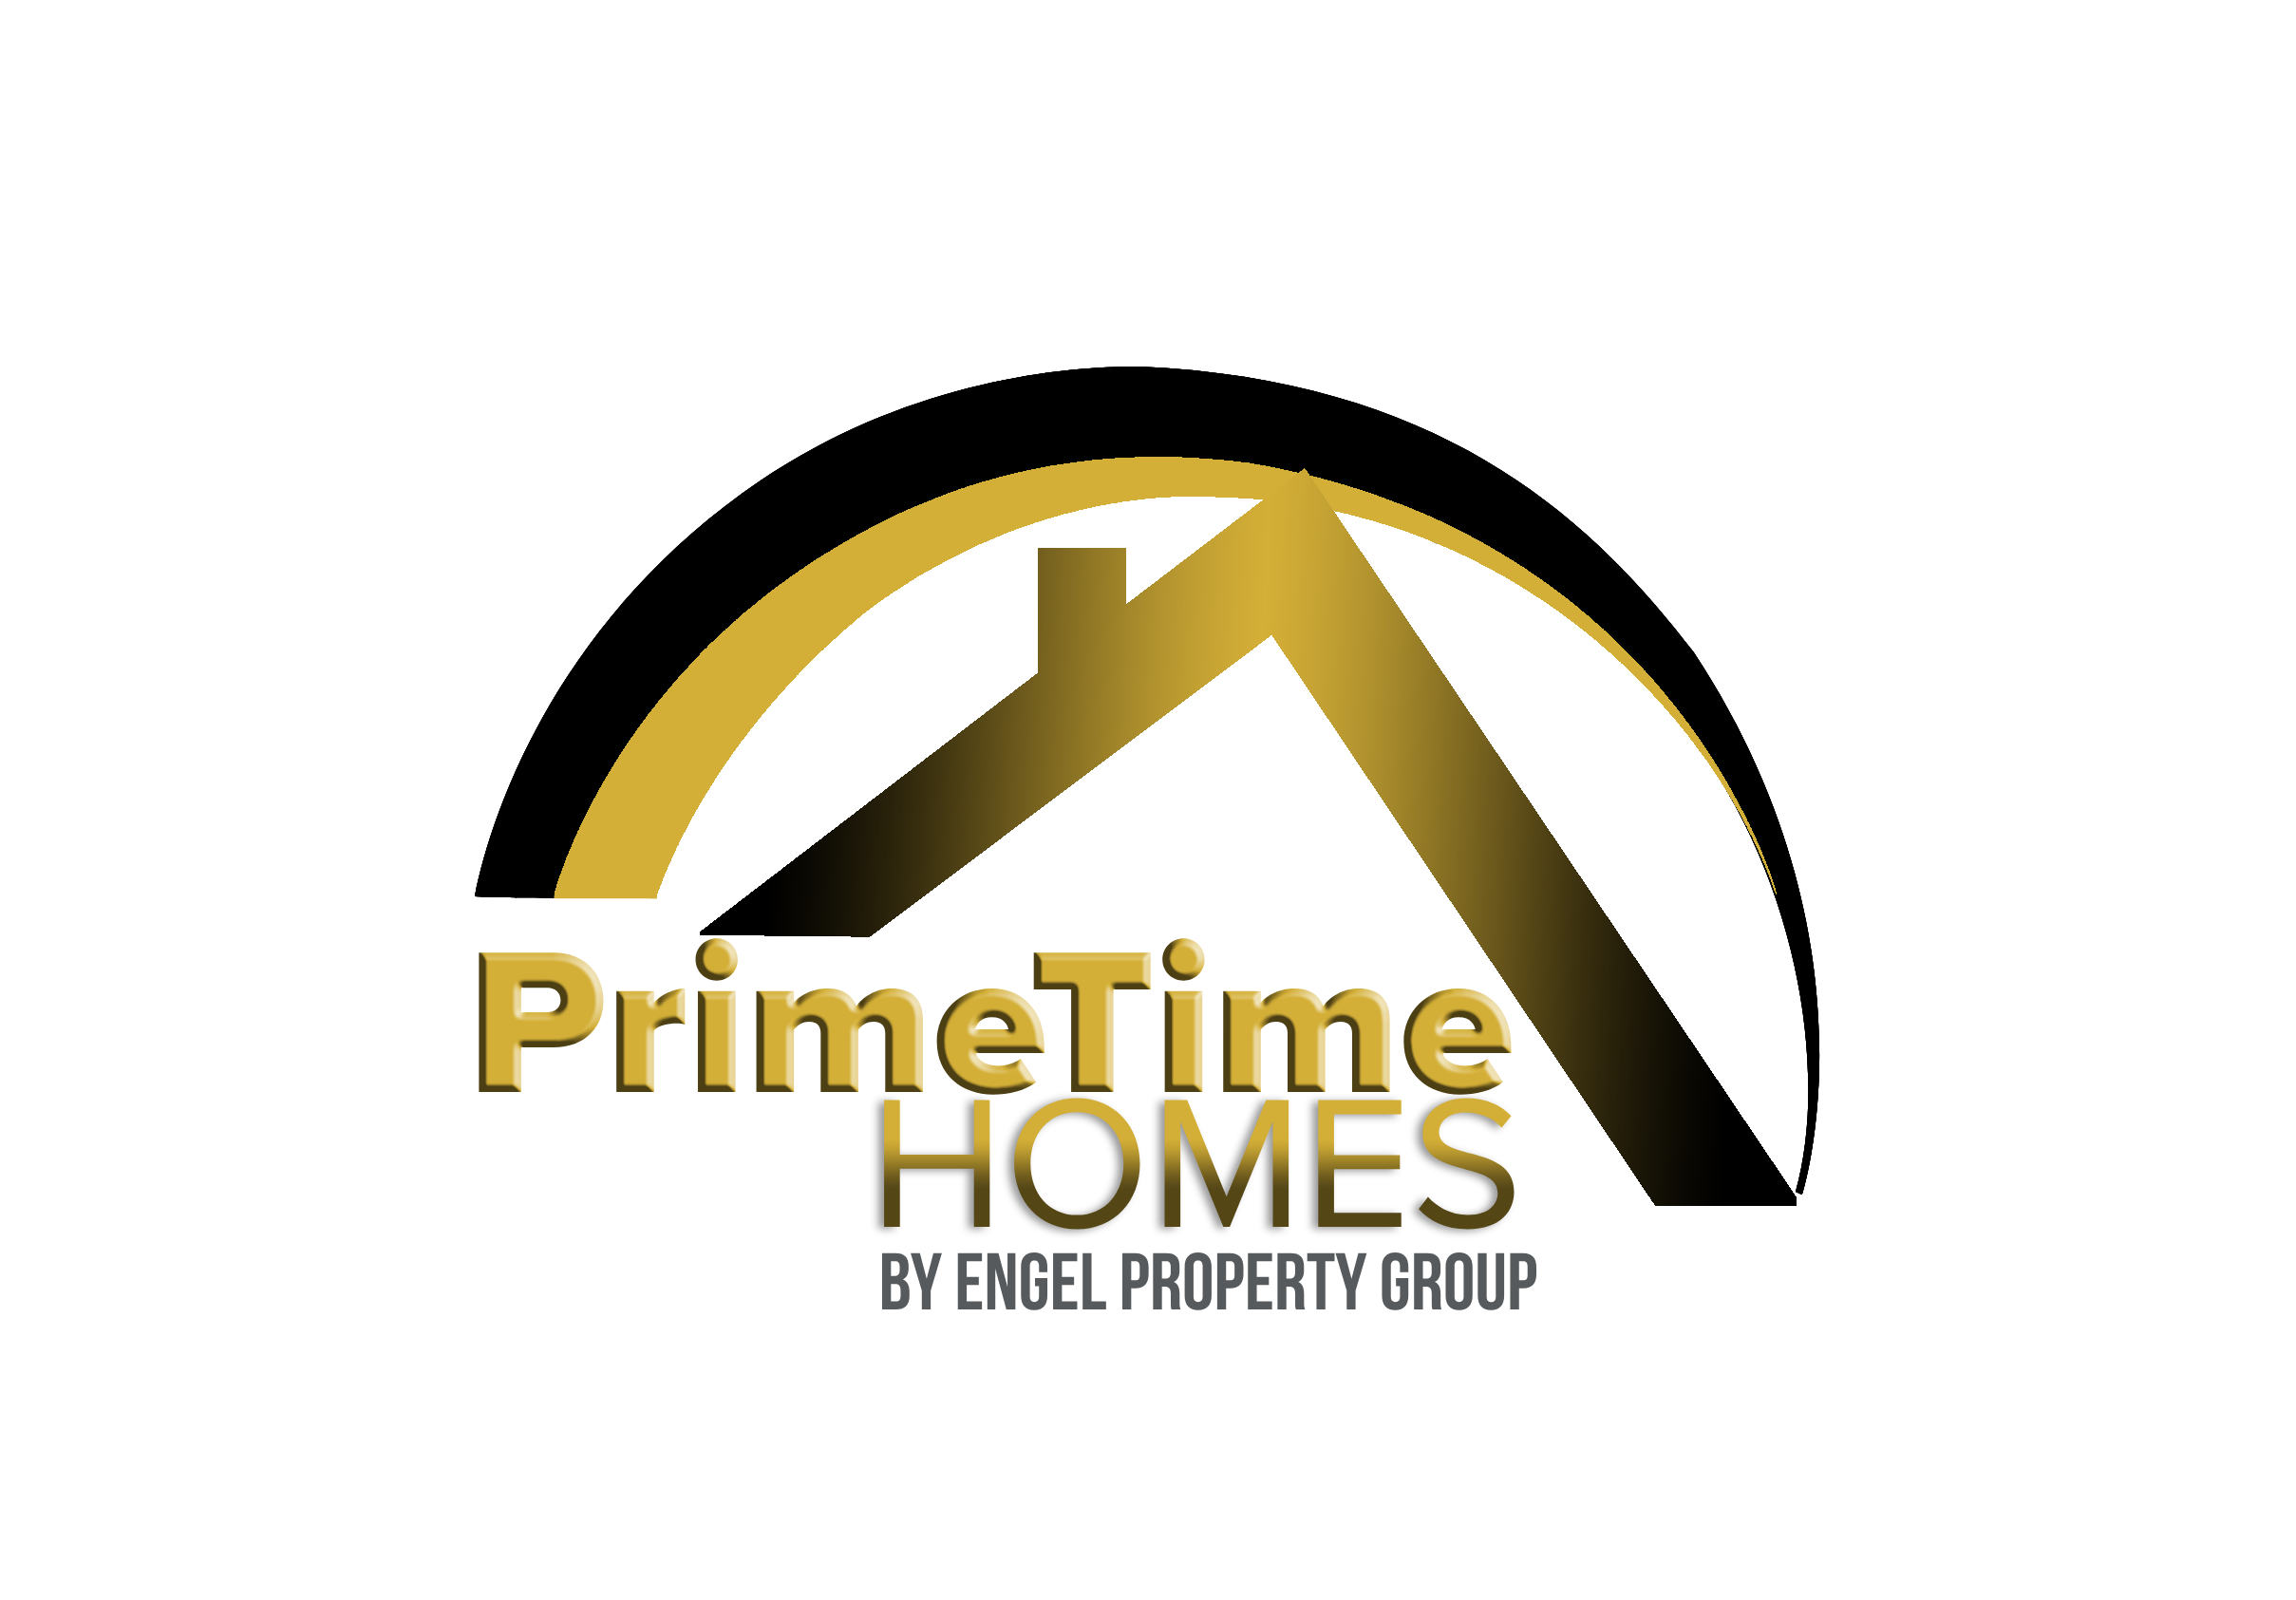 Prime Time Homes by Engel Property Group